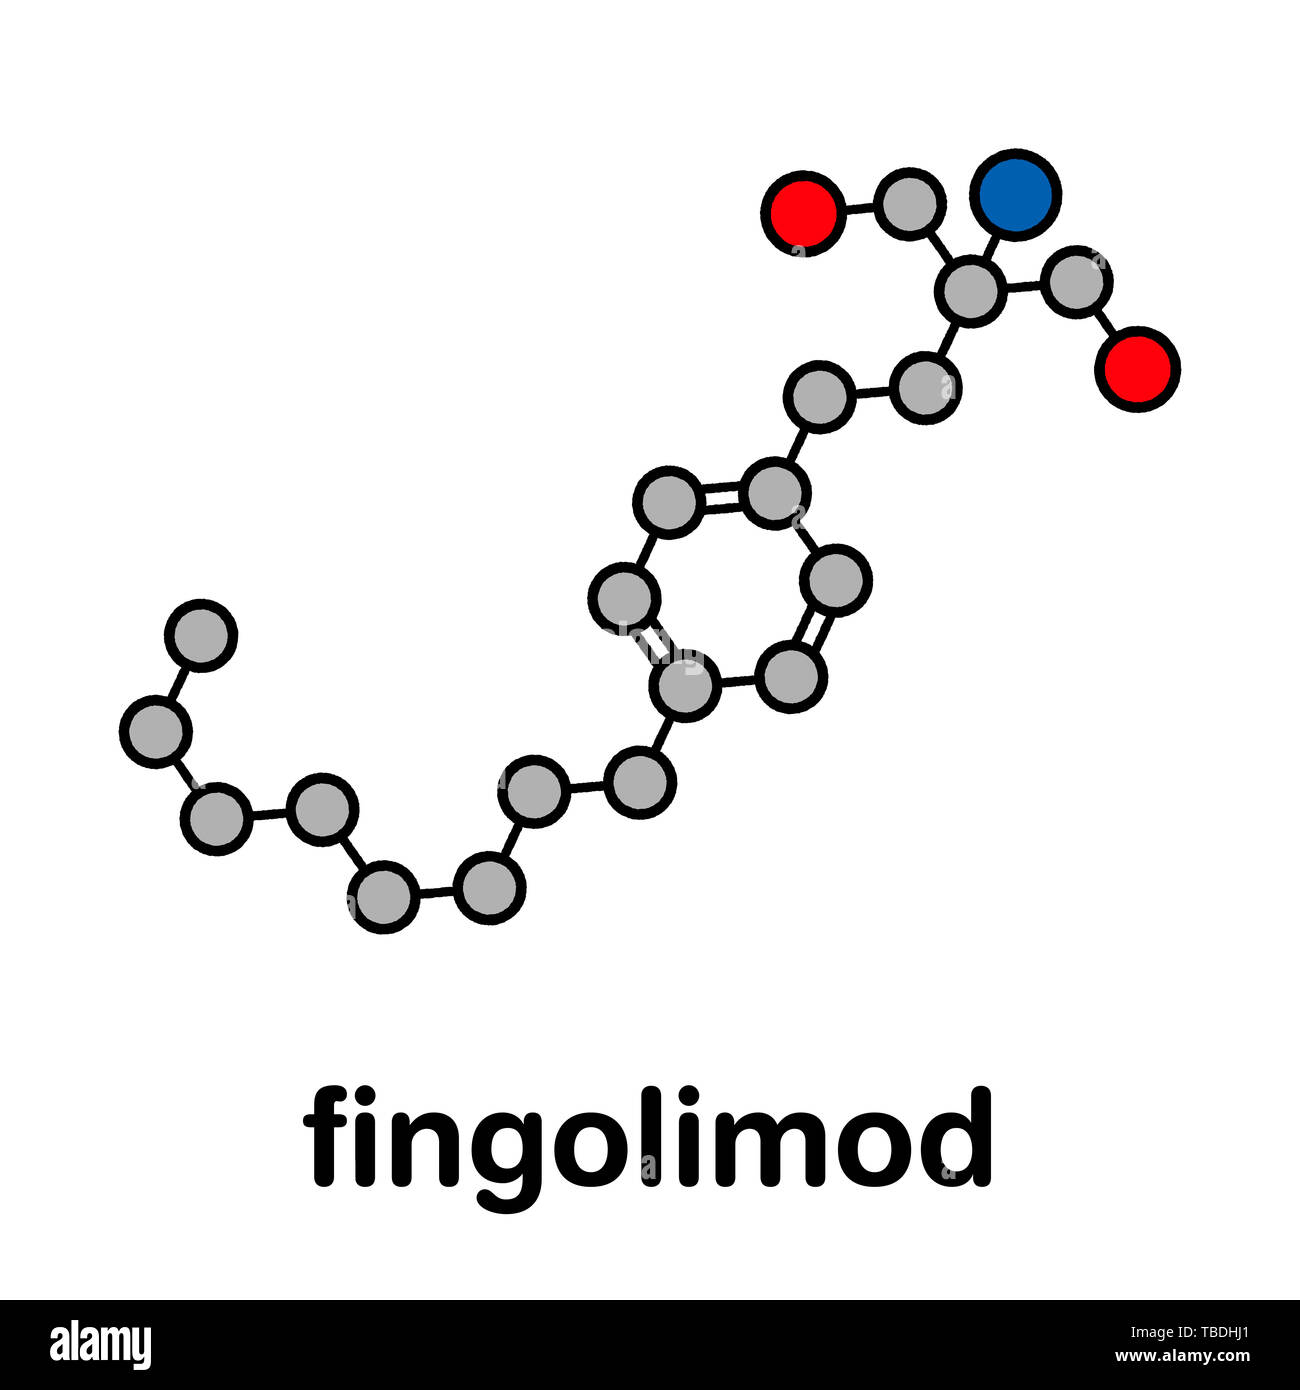 Fingolimod multiple sclerosis (MS) drug molecule. Stylized skeletal formula (chemical structure). Atoms are shown as color-coded circles with thick black outlines and bonds: hydrogen (hidden), carbon (grey), oxygen (red), nitrogen (blue). Stock Photo